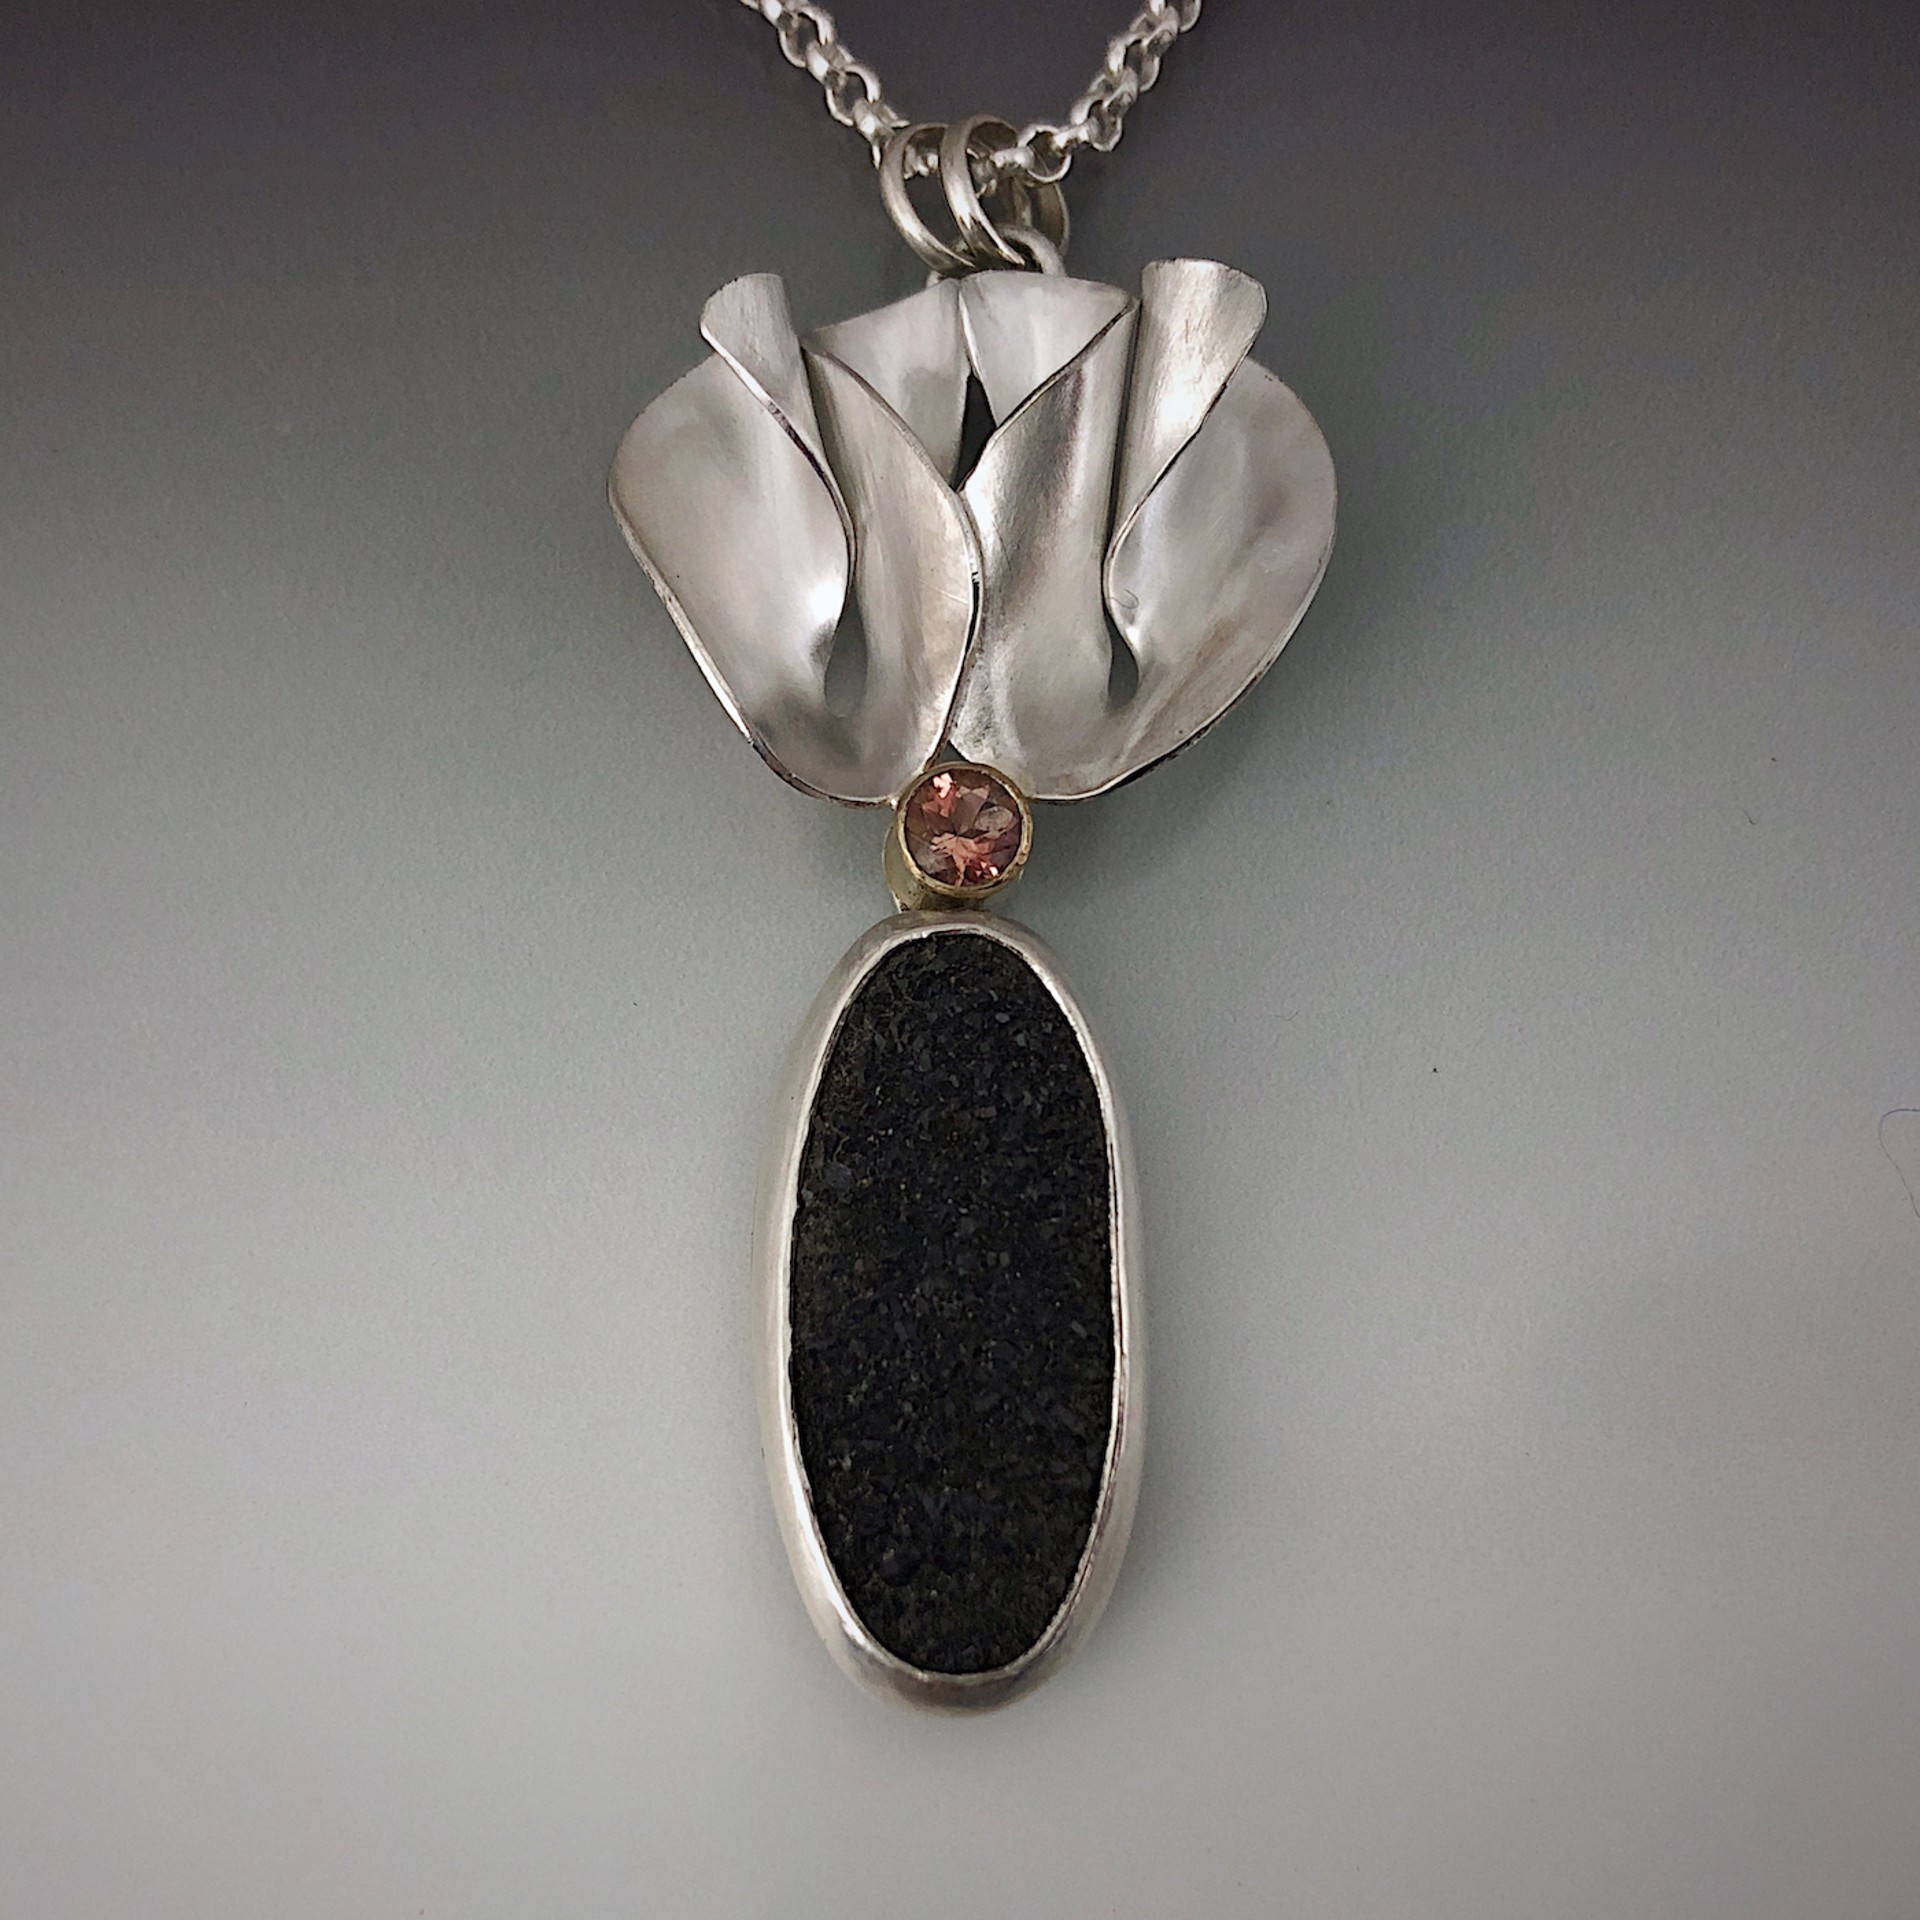 Cleome Petals Necklace with Sunstone and Black Druzy by Marie-Helene Rake